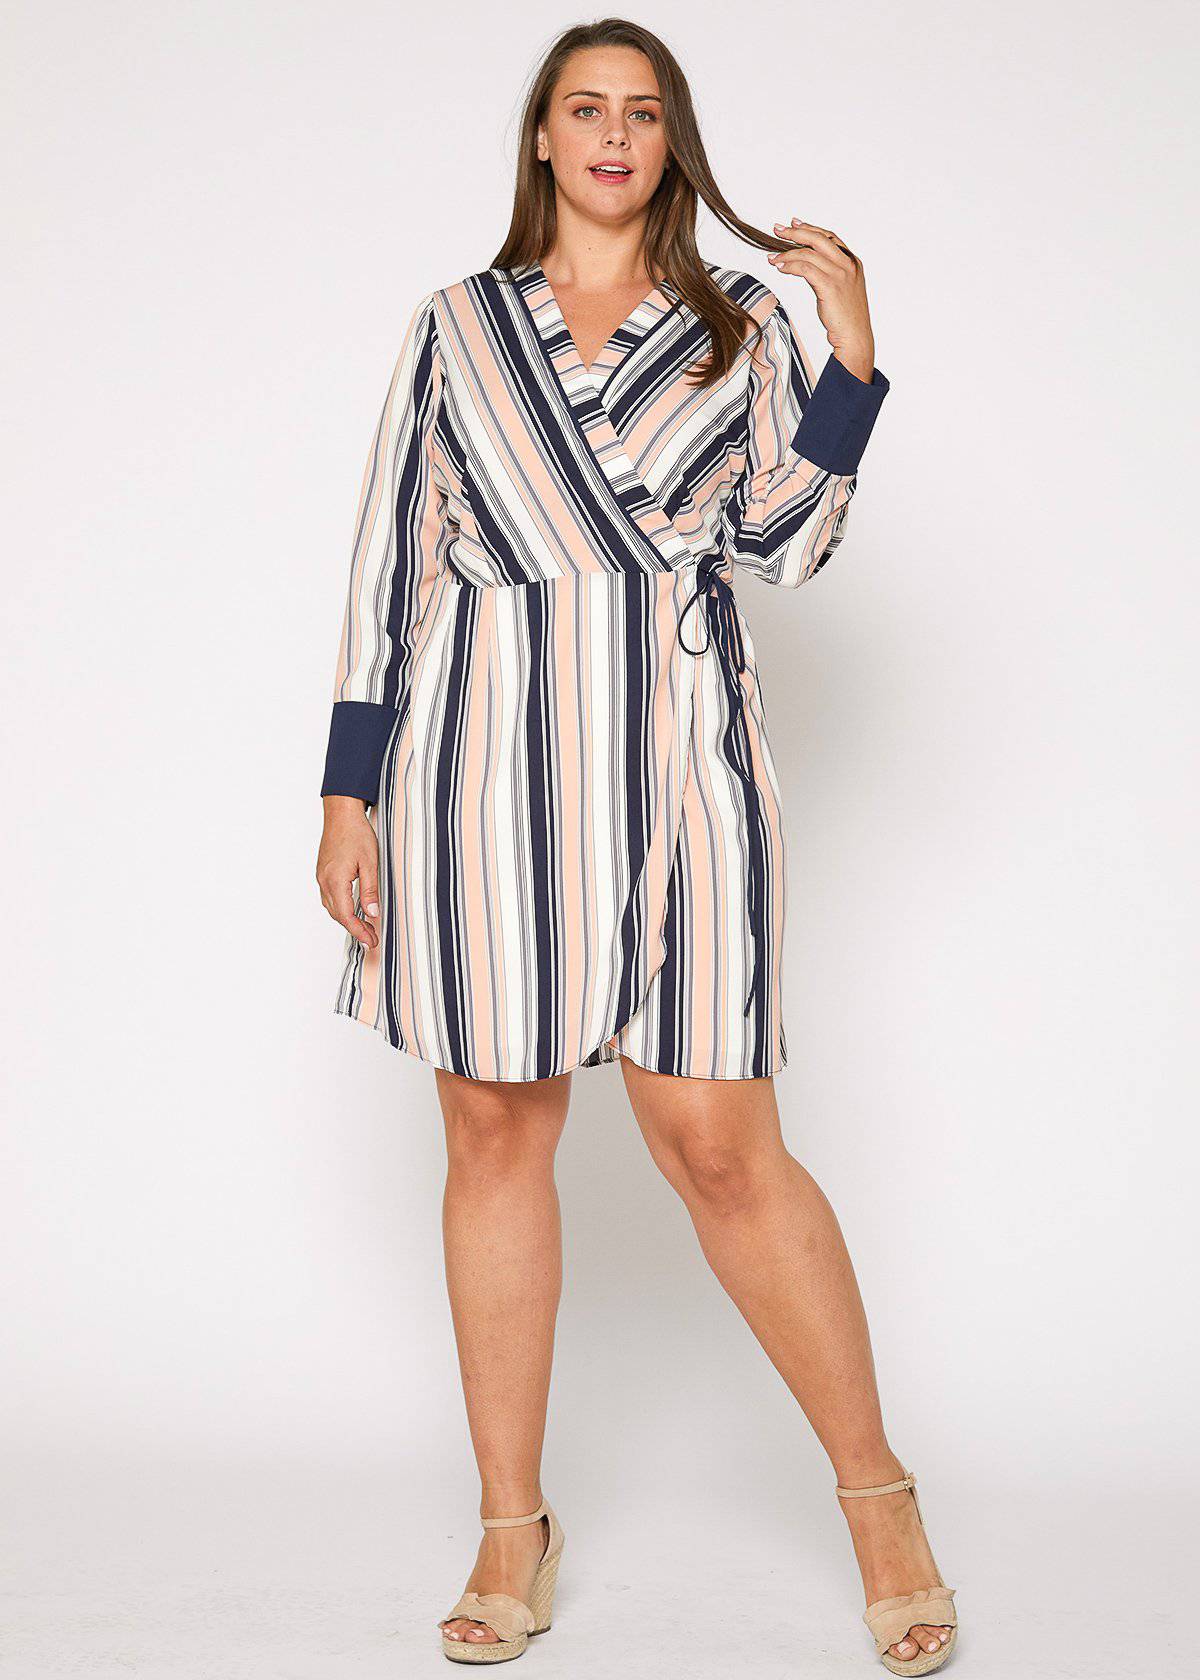 Plus Size Printed Wrap Dress With Cuff Binding in Multi by Shop at Konus